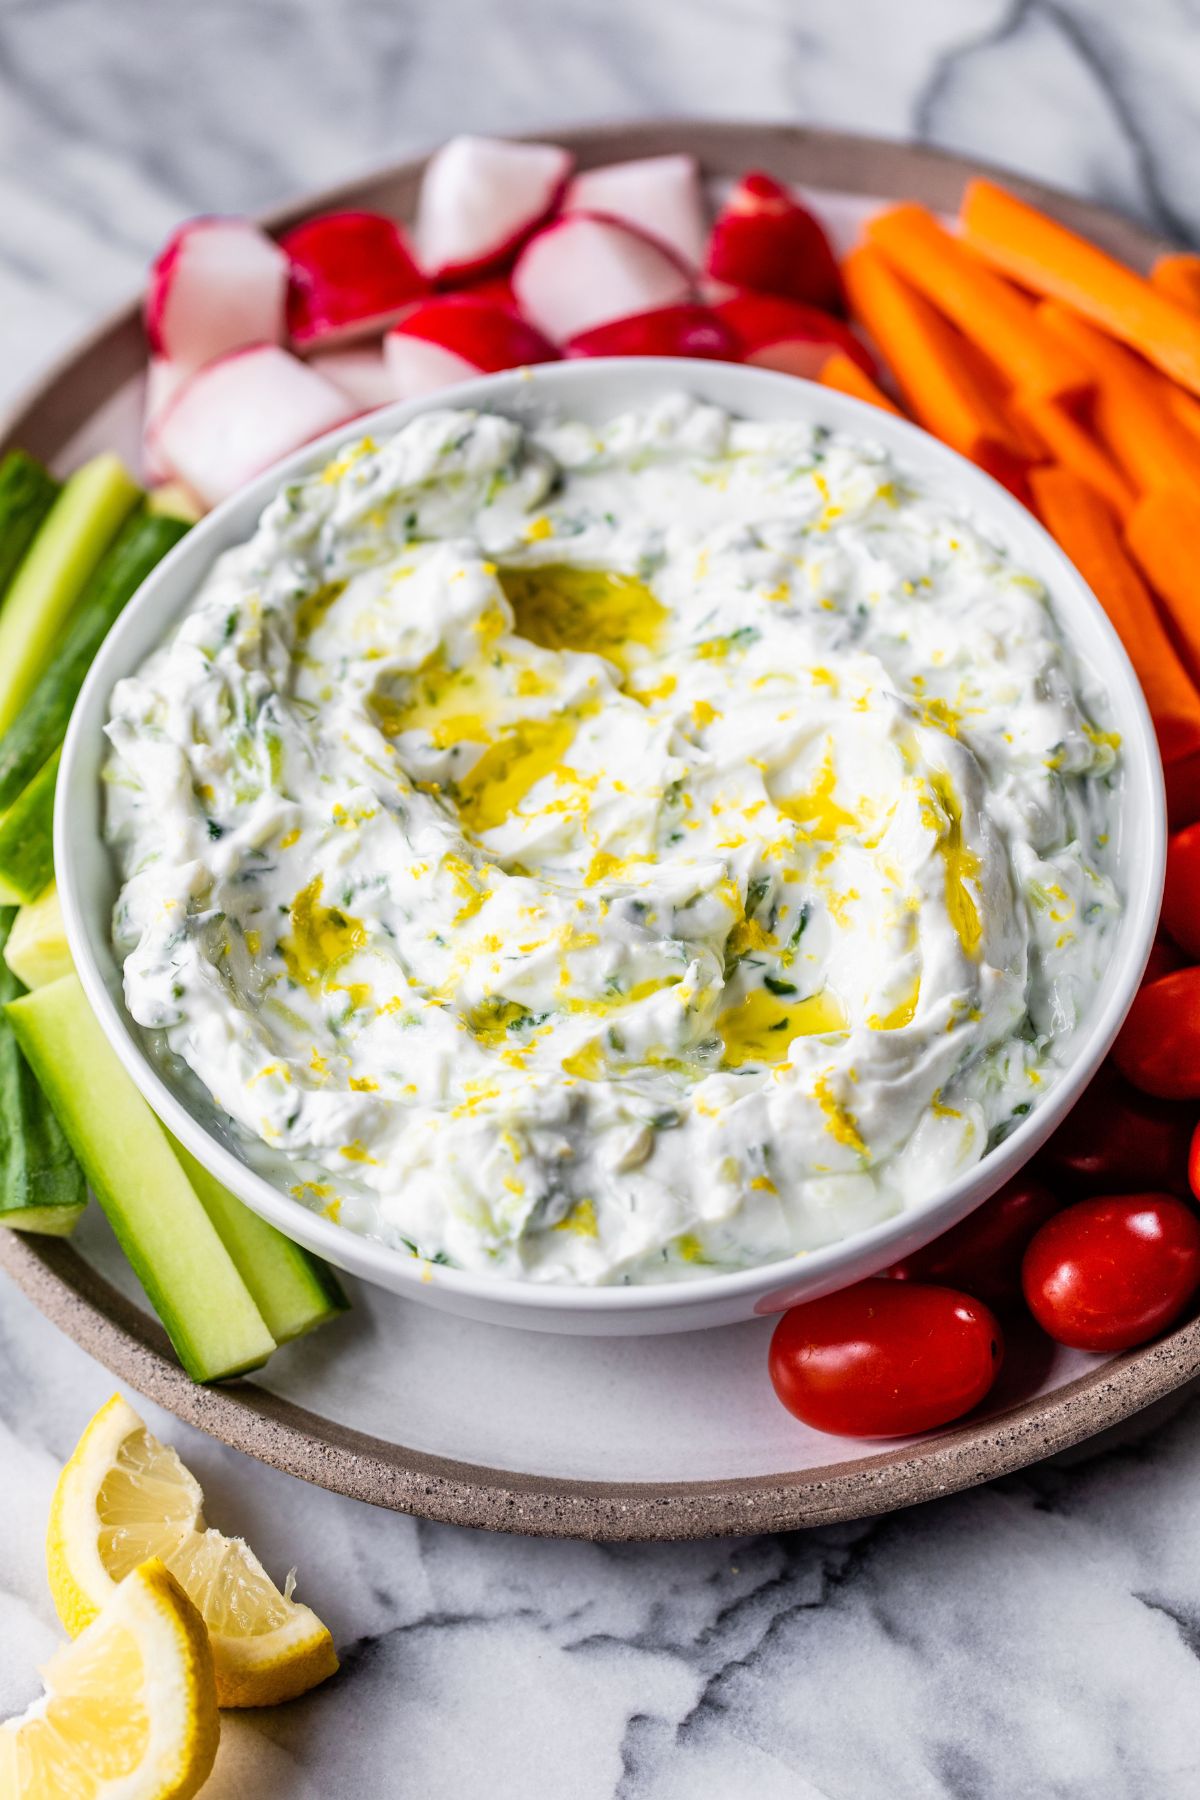 Tzatziki served with celery, tomatoes and carrots.